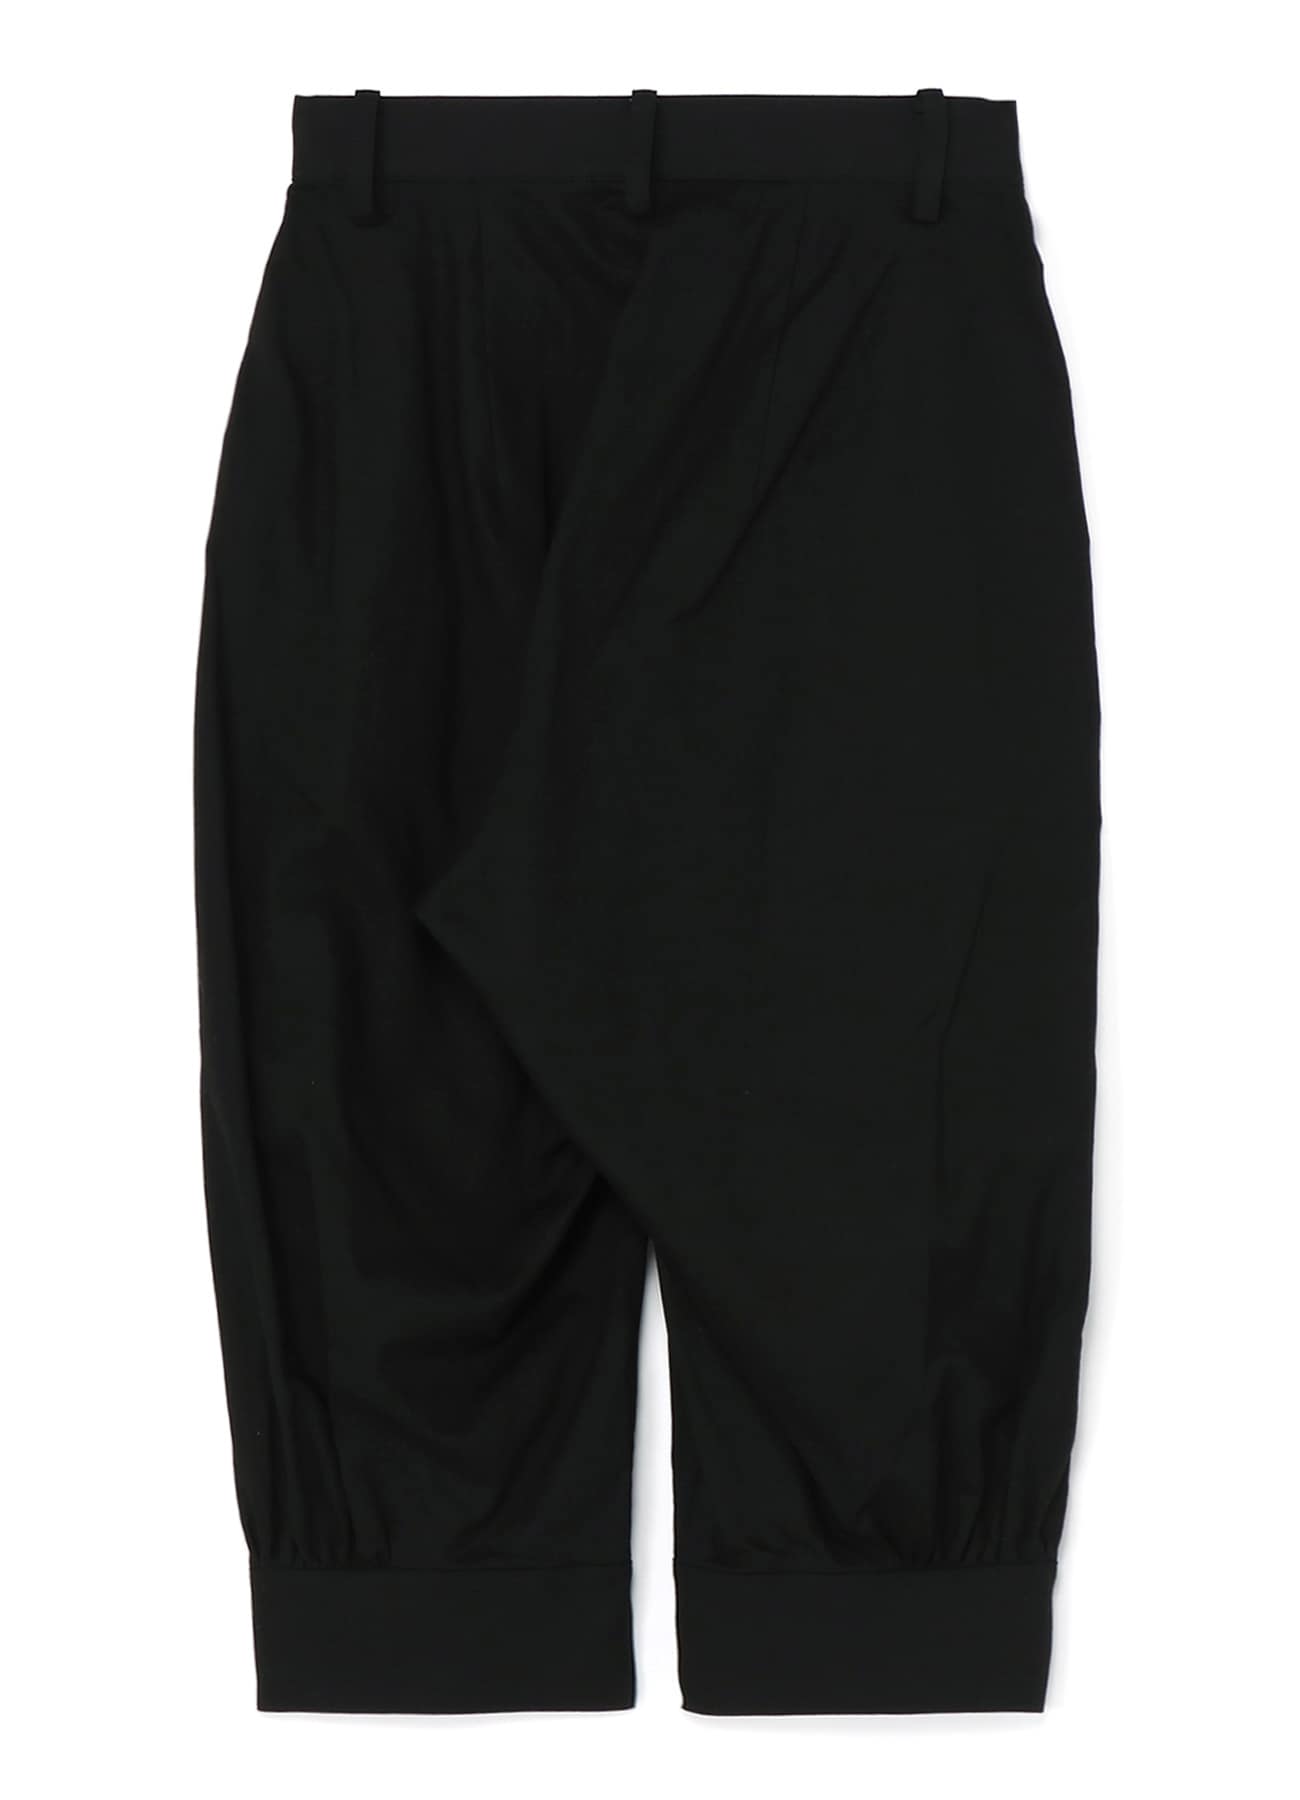 COTTON/LINEN PANTS WITH GATHERED HEMS(XS Black): Vintage 1.1｜THE 